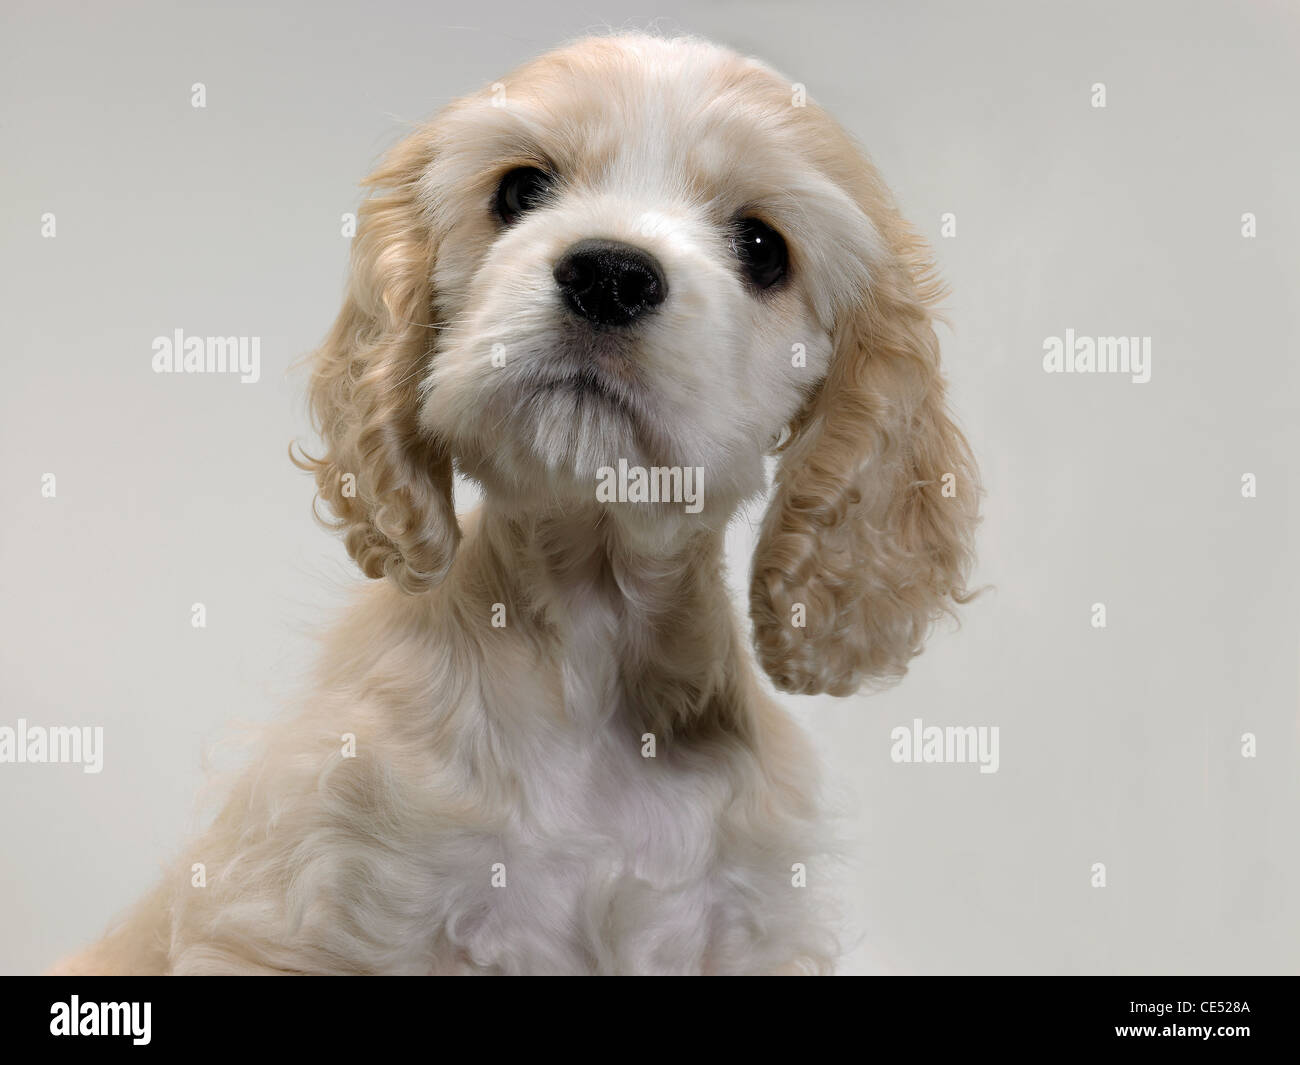 An American Cocker Spaniel puppy looking inquisitive Stock Photo